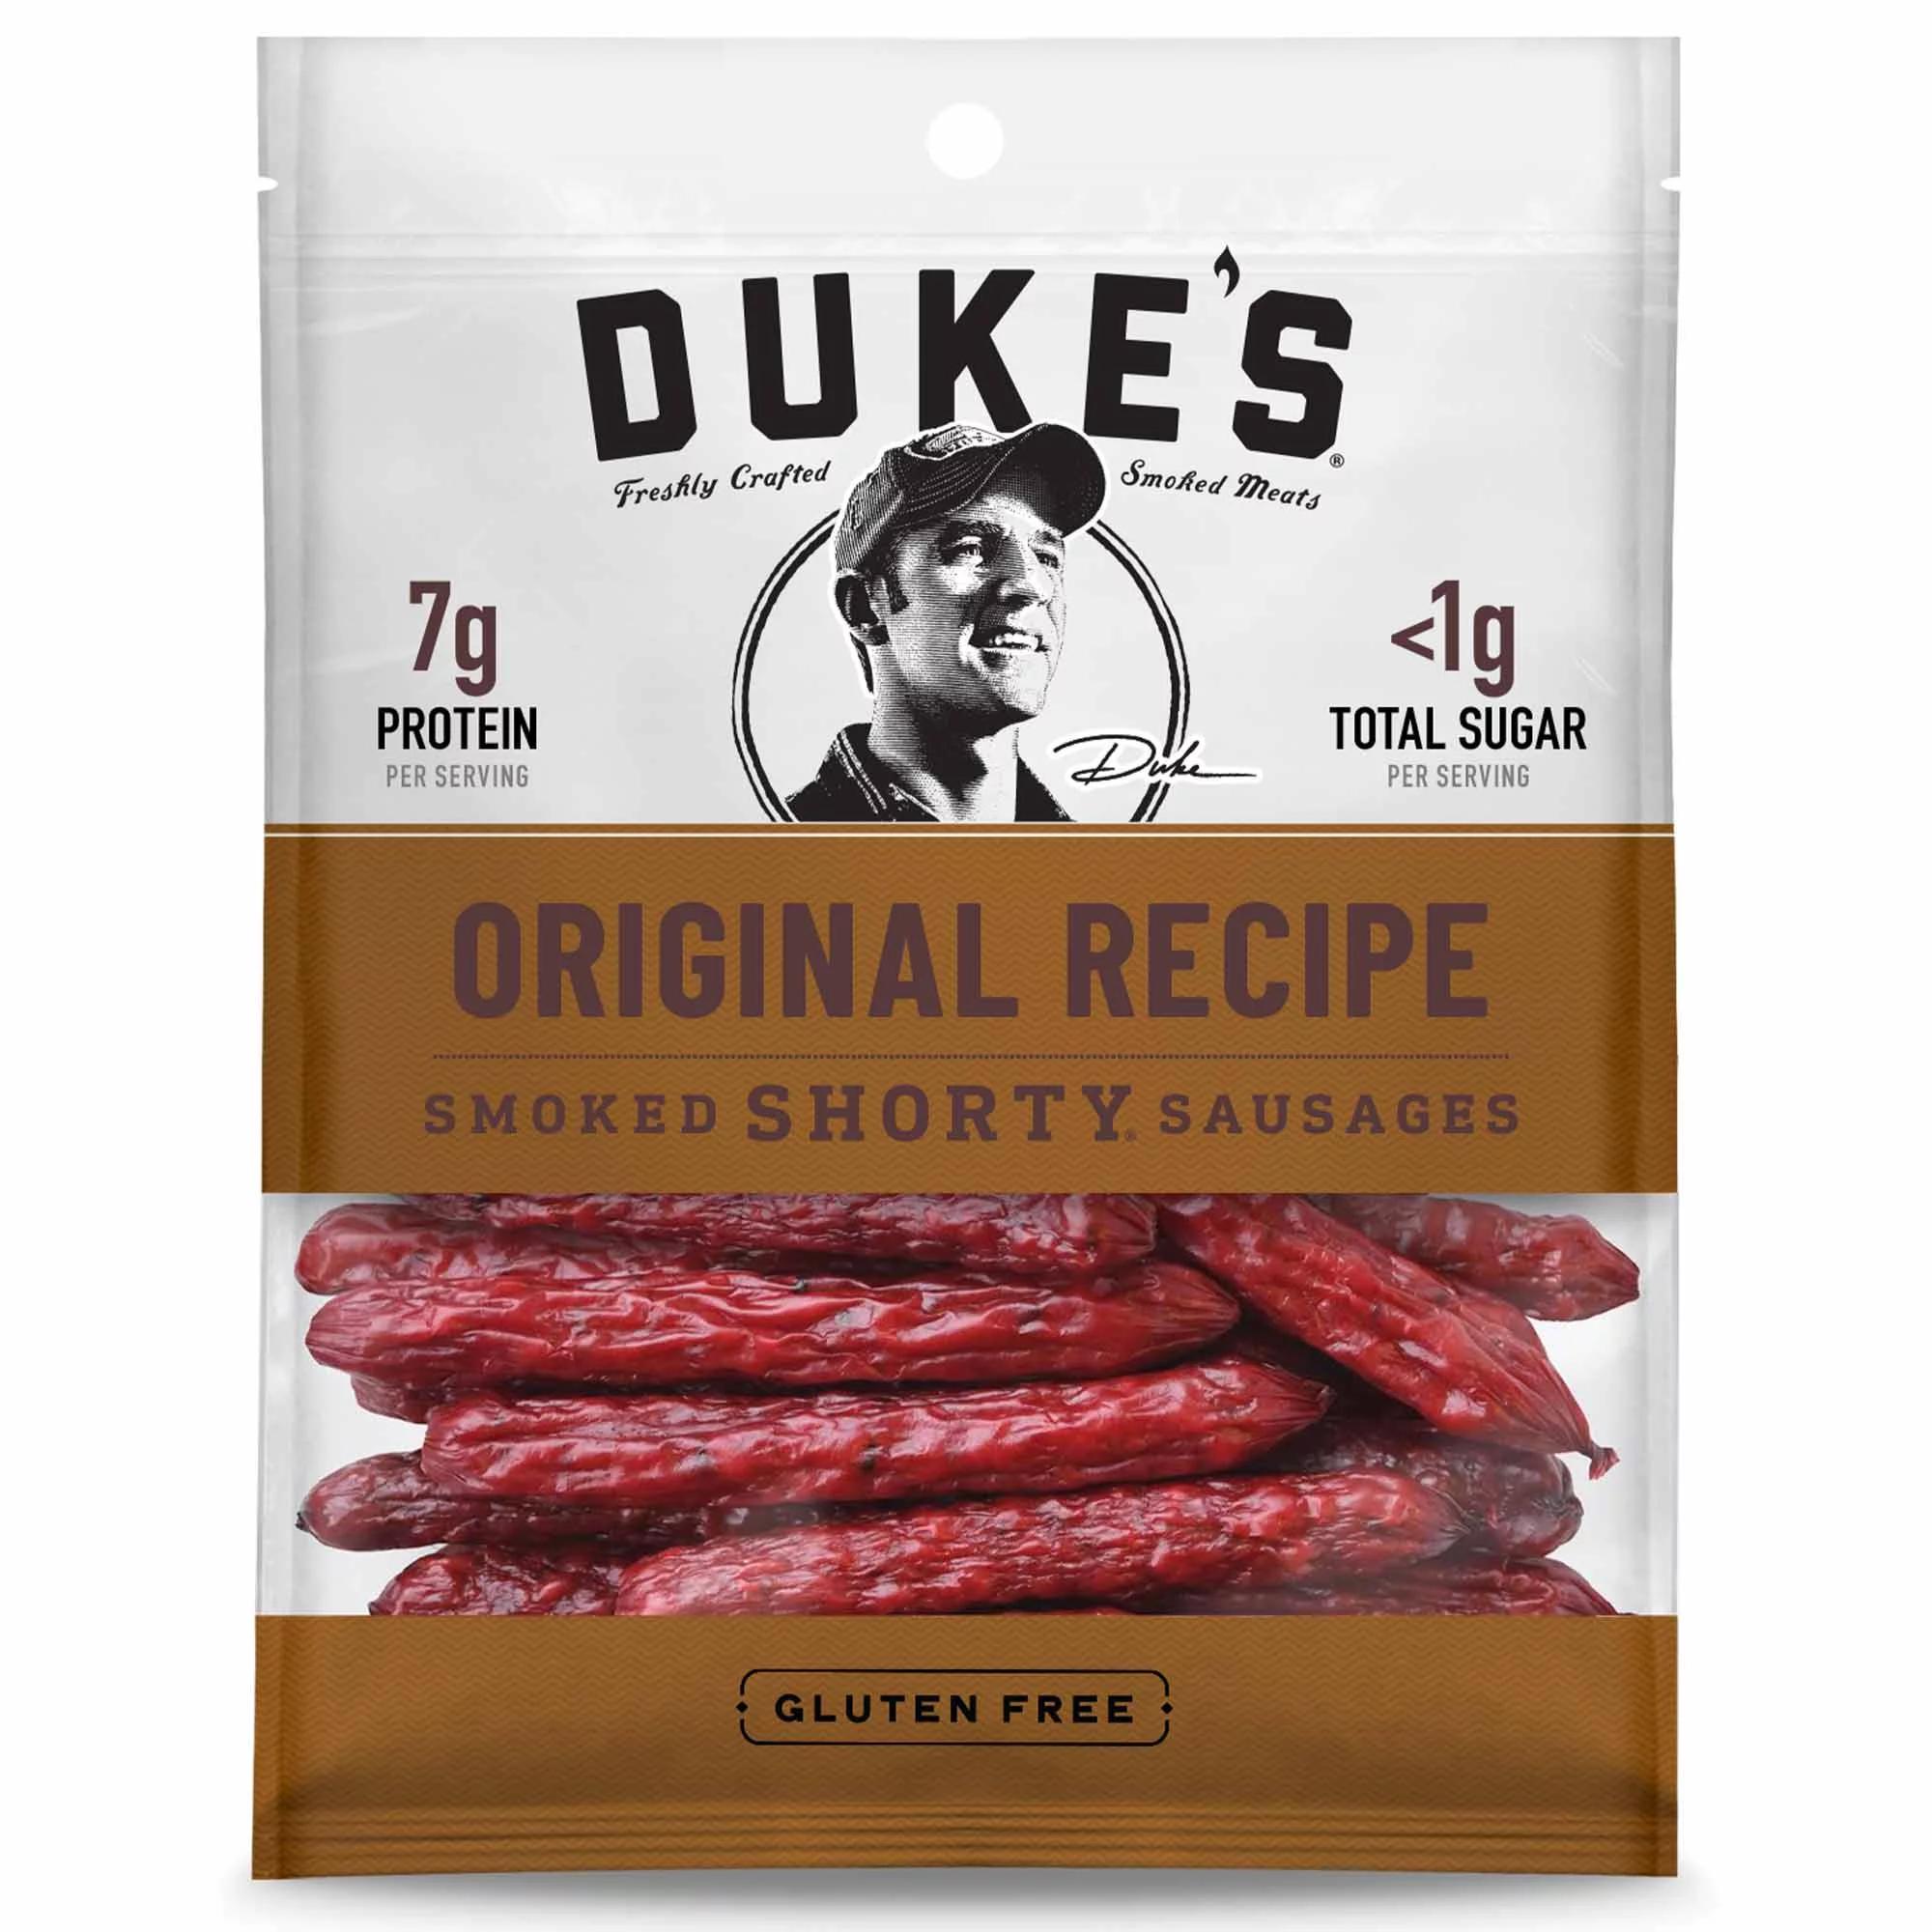 dukes smoked shorty sausages - Are Duke's Shorty sausages healthy